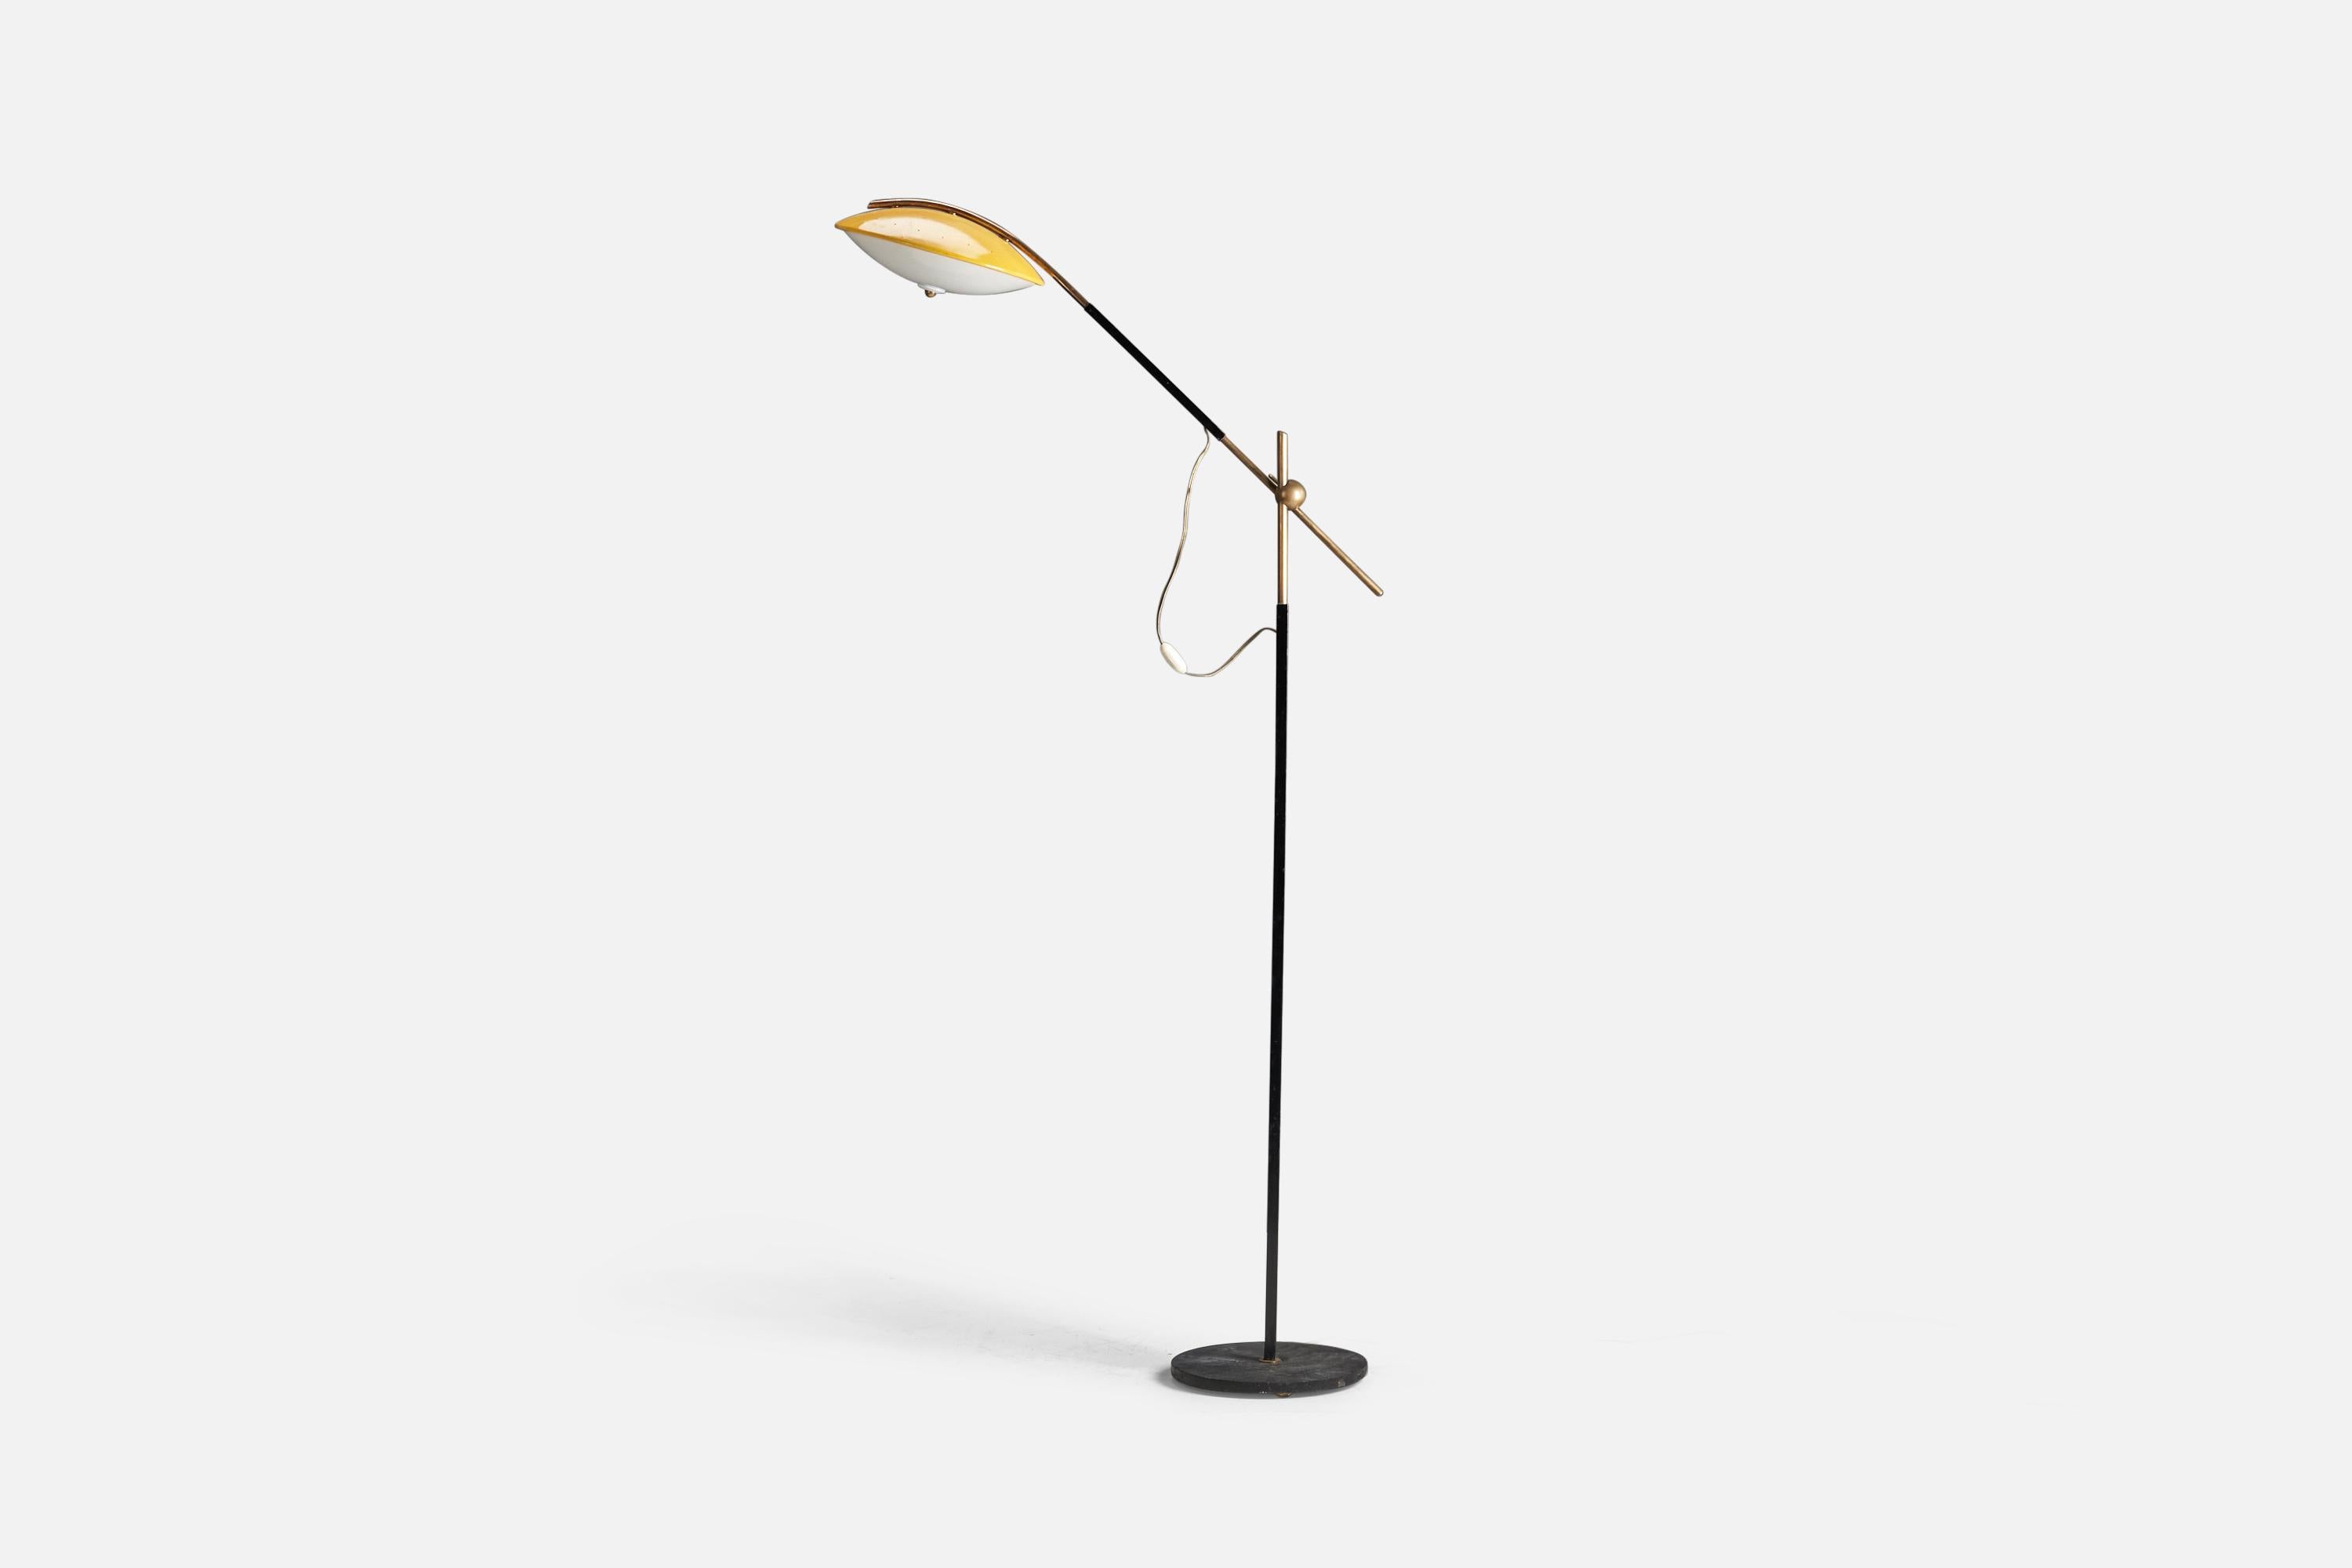 A brass, yellow and black-lacquered metal and acrylic floor lamp designed and produced by Stilux Milano, Italy, 1960s.

Dimensions variable, measured as illustrated in first image.

Socket takes E-14 bulb.

There is no maximum wattage stated